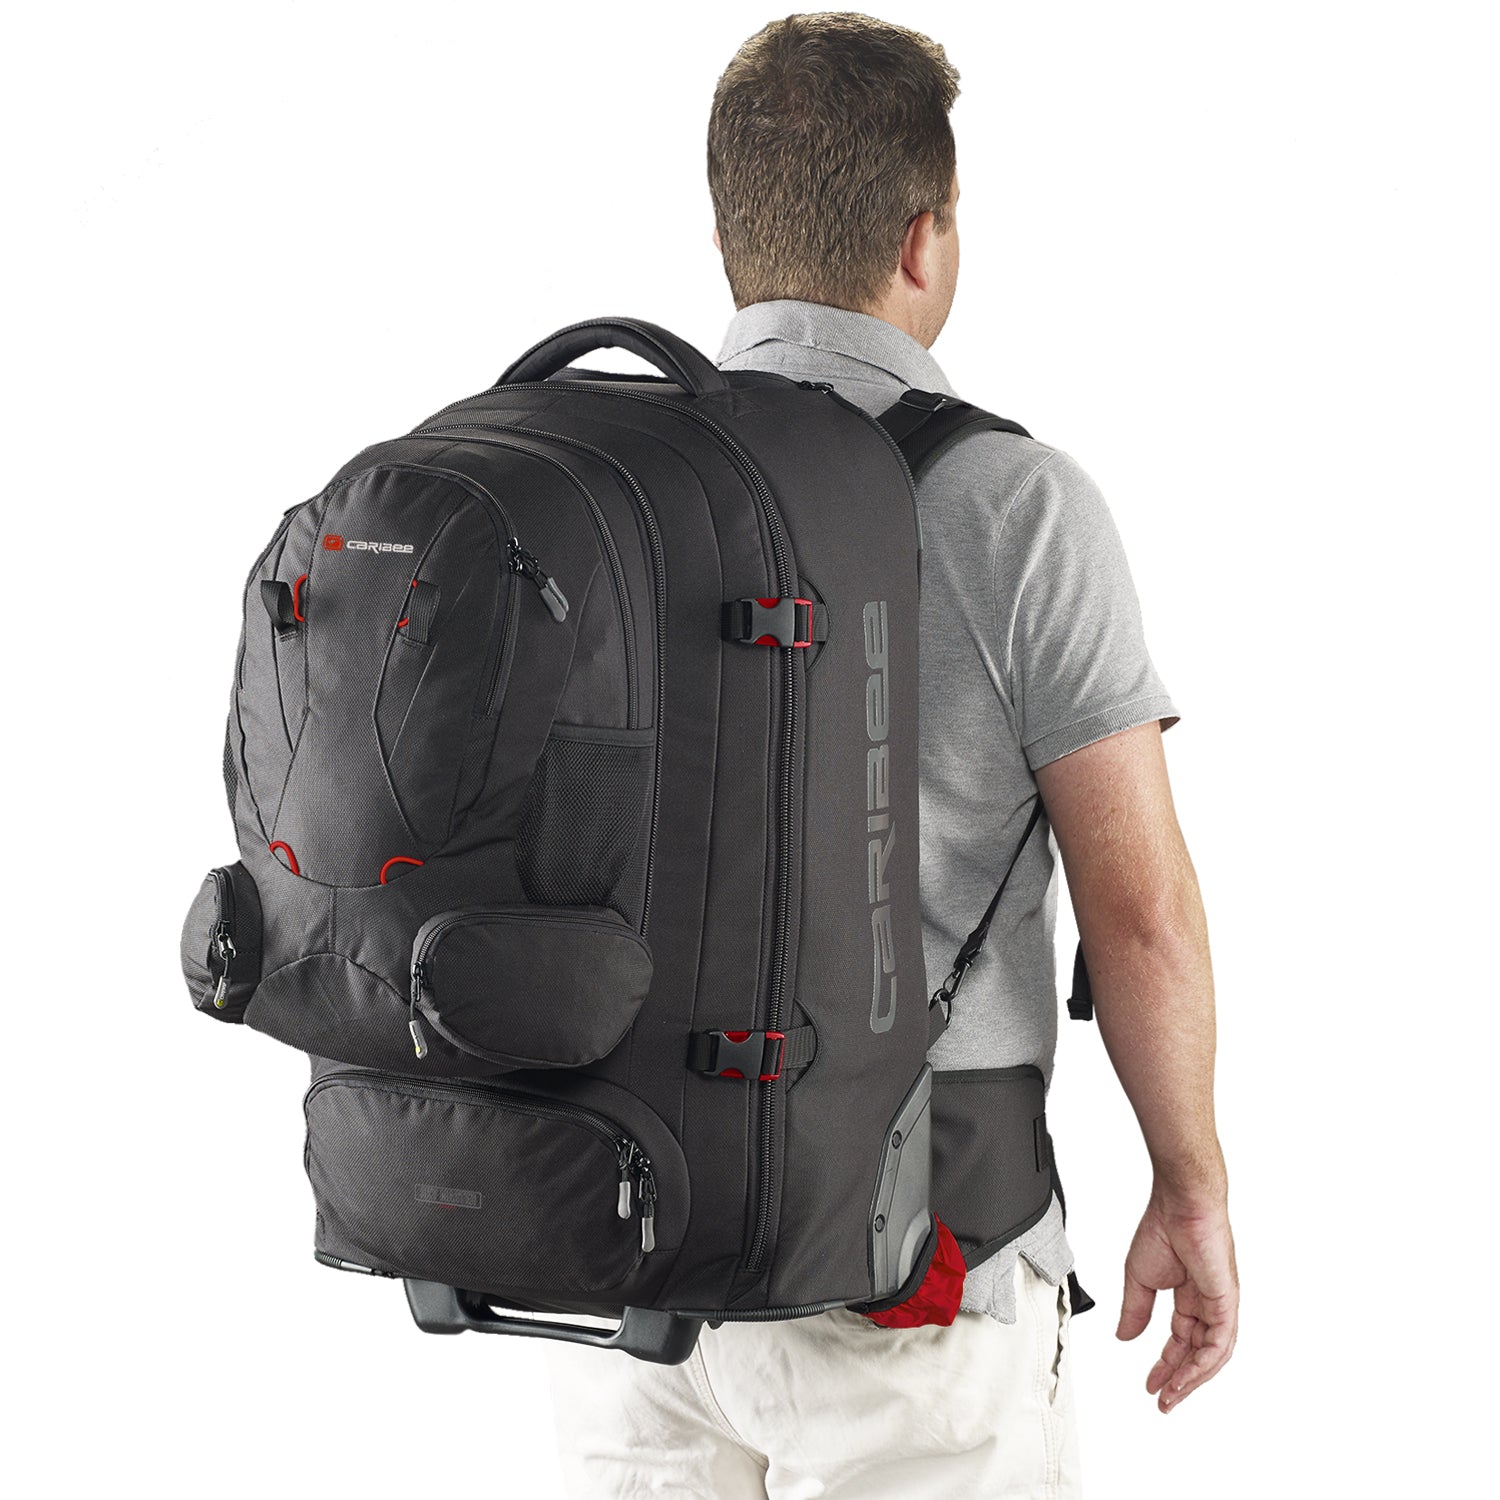 Caribee Sky Master 80L III wheel travel backpack with harness in use